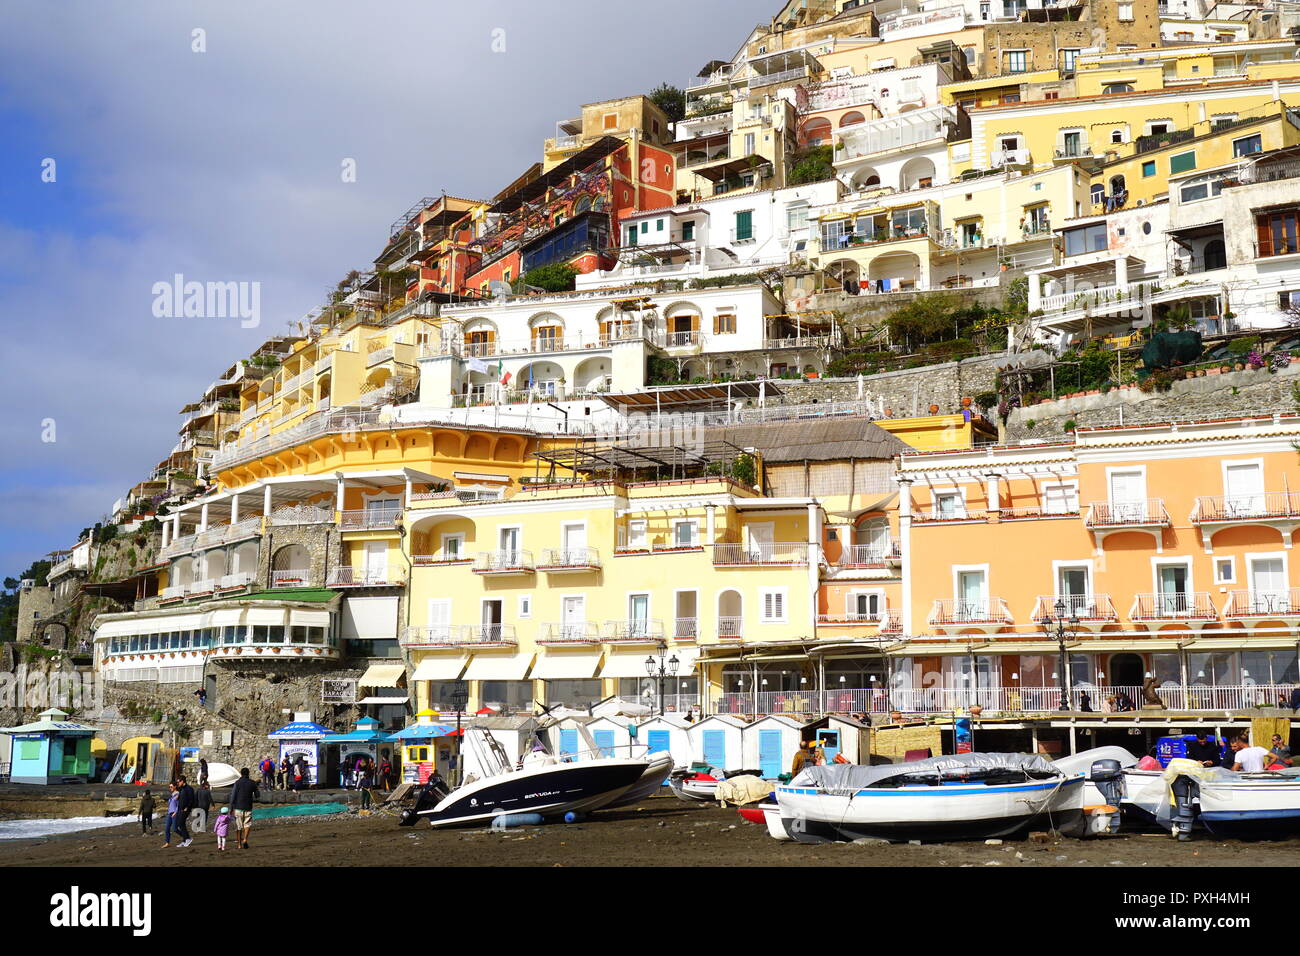 Beach with the backdrop of colorful homes on a steep mountain in Positano, a cliffside village on southern Italy's Amalfi Coast Stock Photo